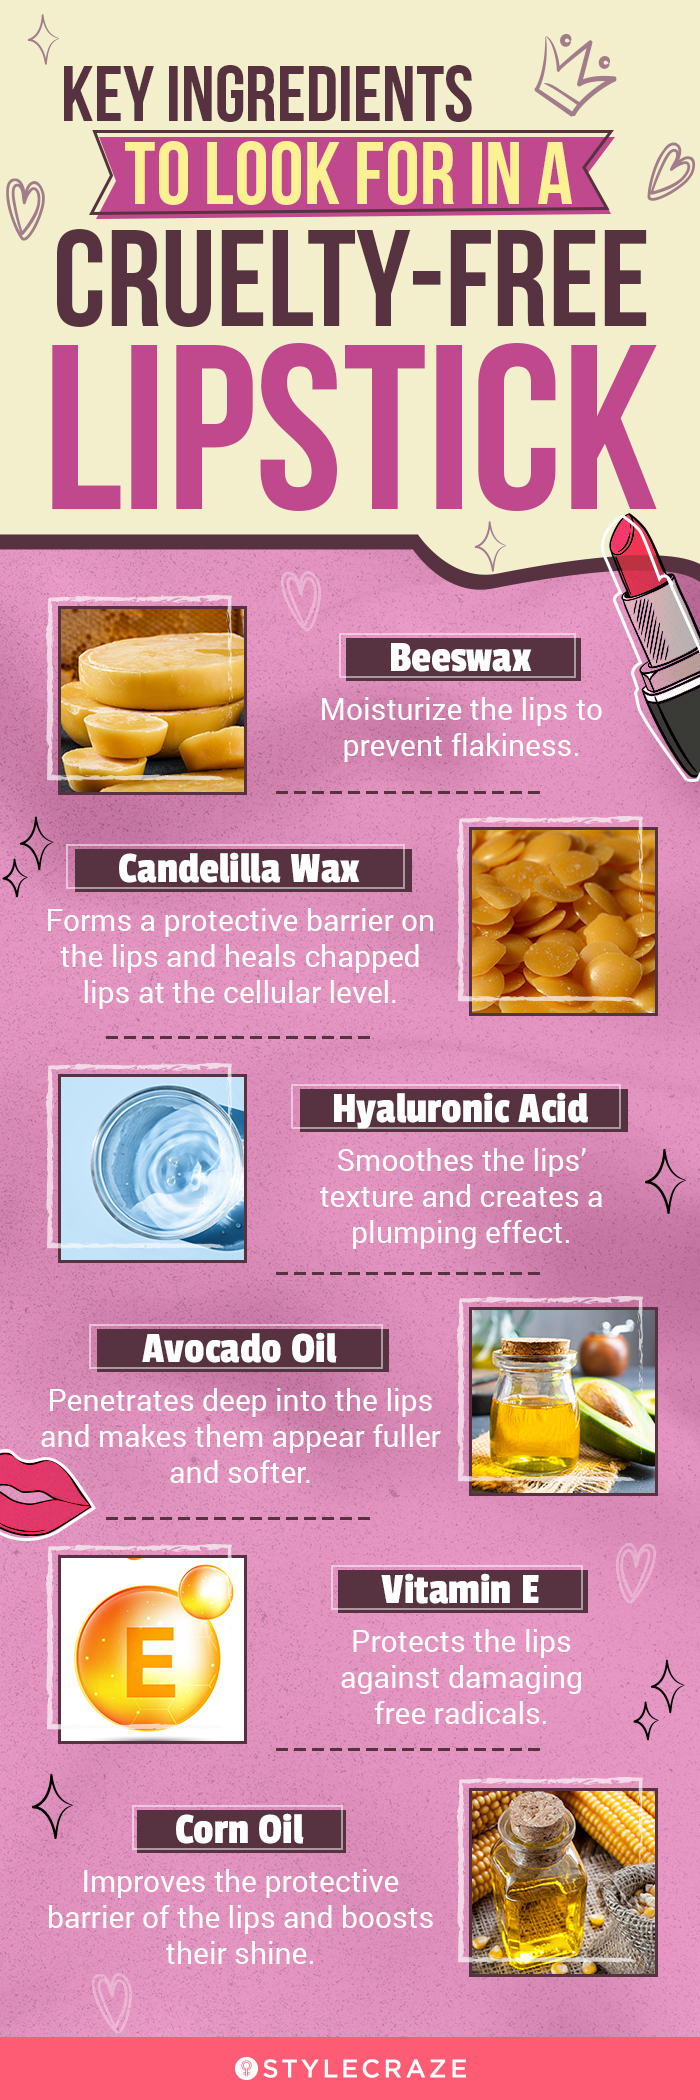 Key Ingredients To Look For In A Cruelty-Free Lipstick (infographic)